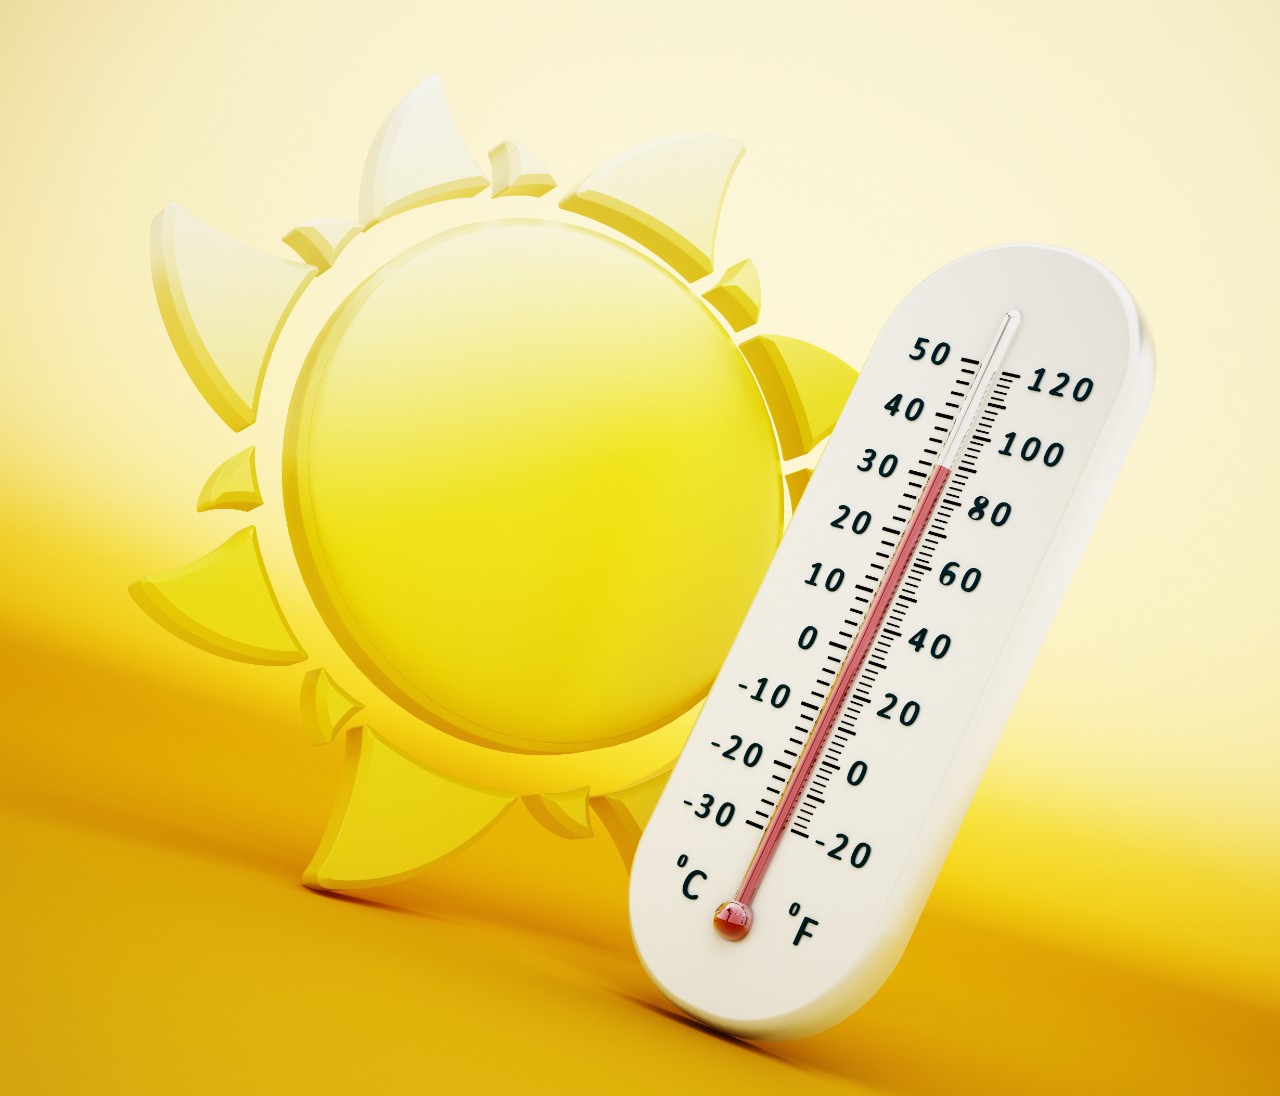 Sun symbol and thermometer showing high temperatures standing on yellow surface.